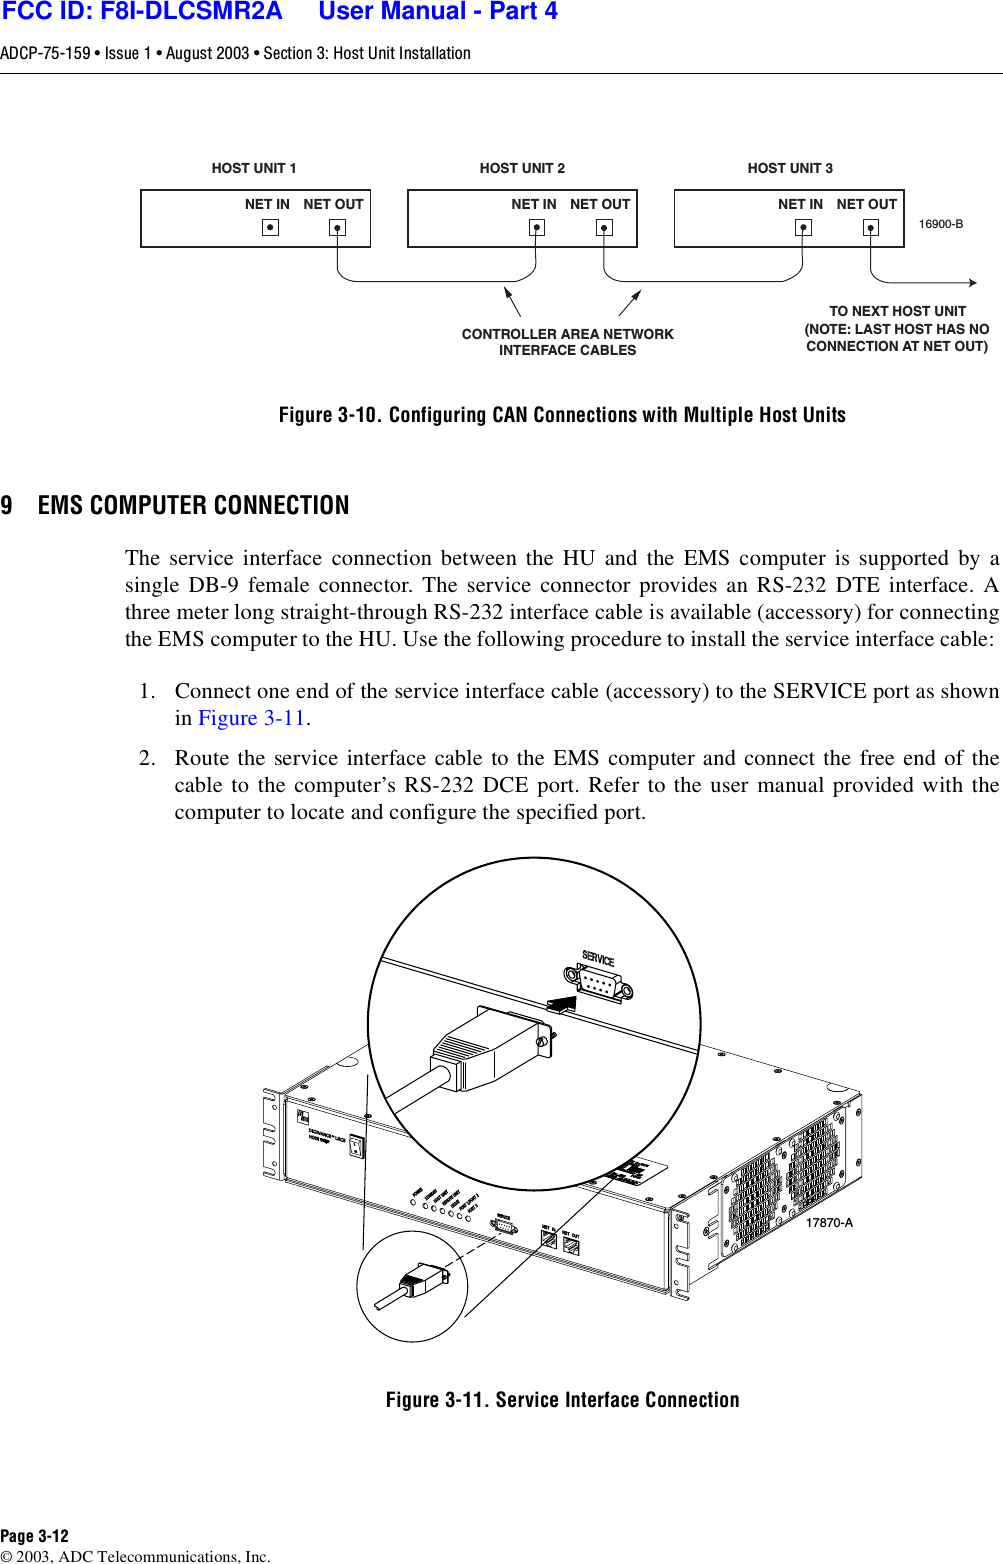 ADCP-75-159 • Issue 1 • August 2003 • Section 3: Host Unit InstallationPage 3-12© 2003, ADC Telecommunications, Inc.Figure 3-10. Configuring CAN Connections with Multiple Host Units9 EMS COMPUTER CONNECTIONThe service interface connection between the HU and the EMS computer is supported by asingle DB-9 female connector. The service connector provides an RS-232 DTE interface. Athree meter long straight-through RS-232 interface cable is available (accessory) for connectingthe EMS computer to the HU. Use the following procedure to install the service interface cable: 1. Connect one end of the service interface cable (accessory) to the SERVICE port as shownin Figure 3-11. 2. Route the service interface cable to the EMS computer and connect the free end of thecable to the computer’s RS-232 DCE port. Refer to the user manual provided with thecomputer to locate and configure the specified port. Figure 3-11. Service Interface ConnectionHOST UNIT 1 HOST UNIT 2 HOST UNIT 3NET IN NET OUT NET IN NET OUT NET IN NET OUT16900-BCONTROLLER AREA NETWORKINTERFACE CABLESTO NEXT HOST UNIT(NOTE: LAST HOST HAS NOCONNECTION AT NET OUT)17870-AFCC ID: F8I-DLCSMR2A     User Manual - Part 4